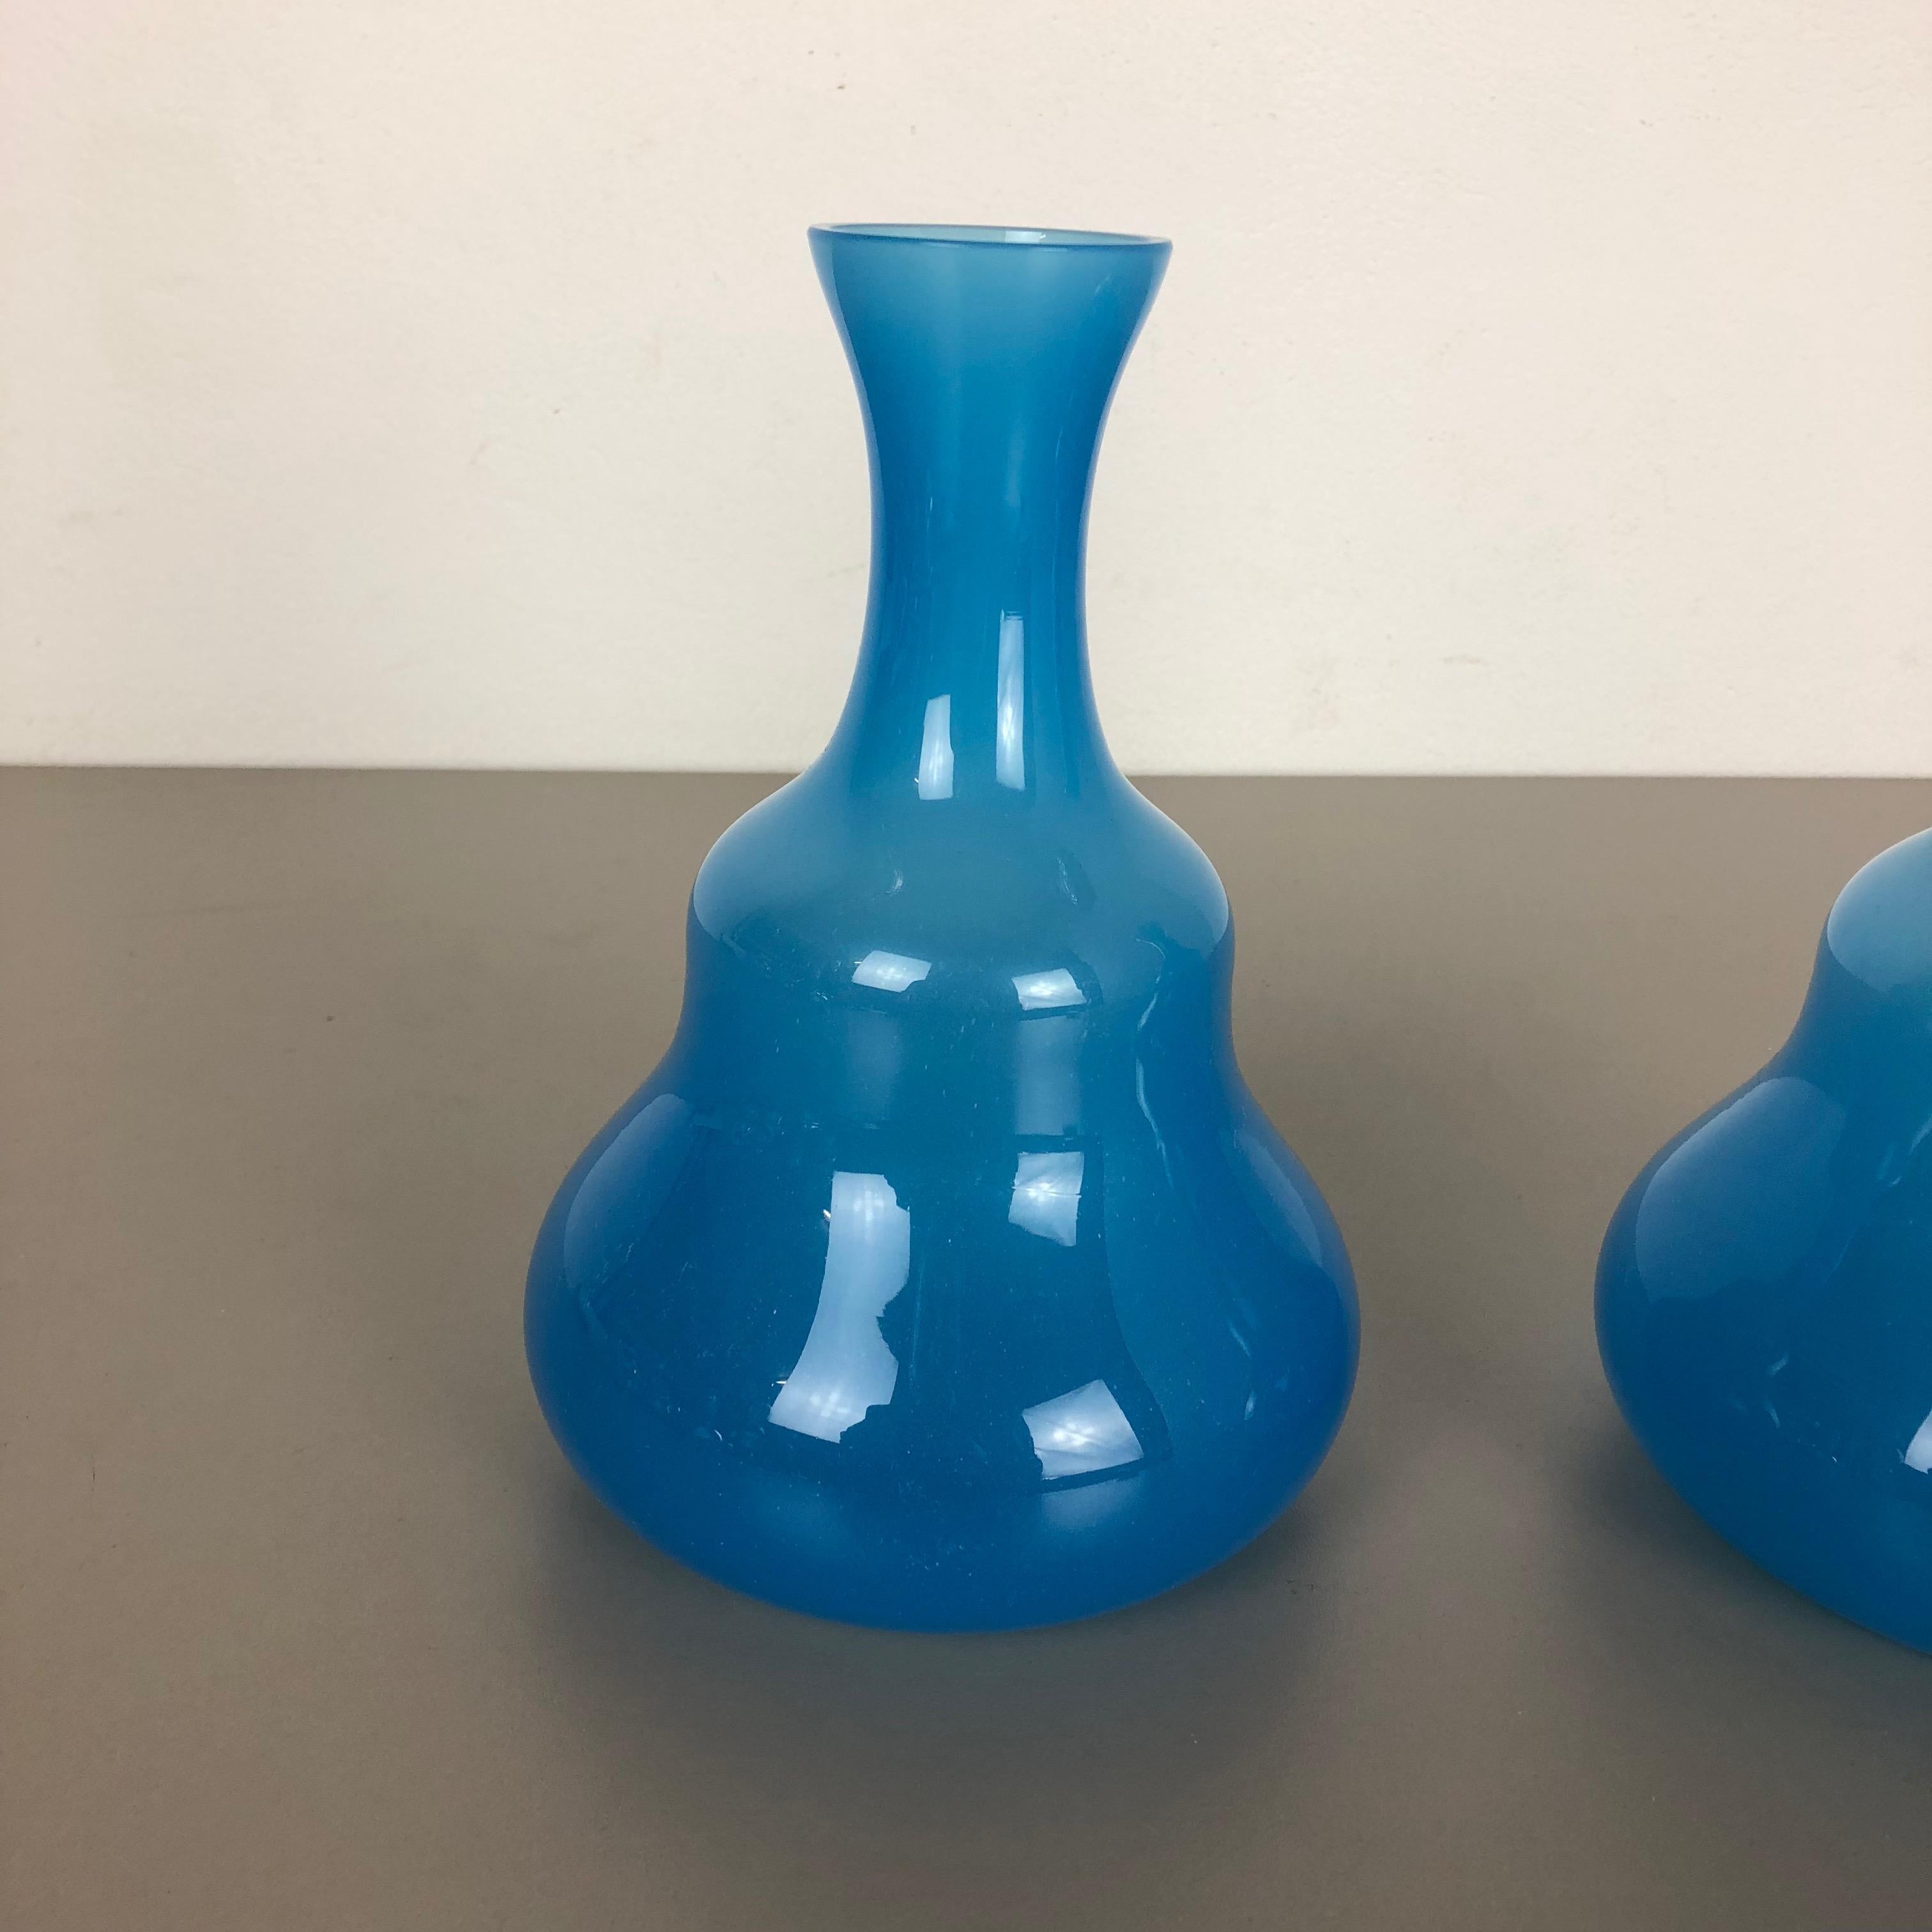 Set of 2 New Old Stock Blue Murano Opaline Glass Vases by Gino Cenedese, 1960s (Italienisch)